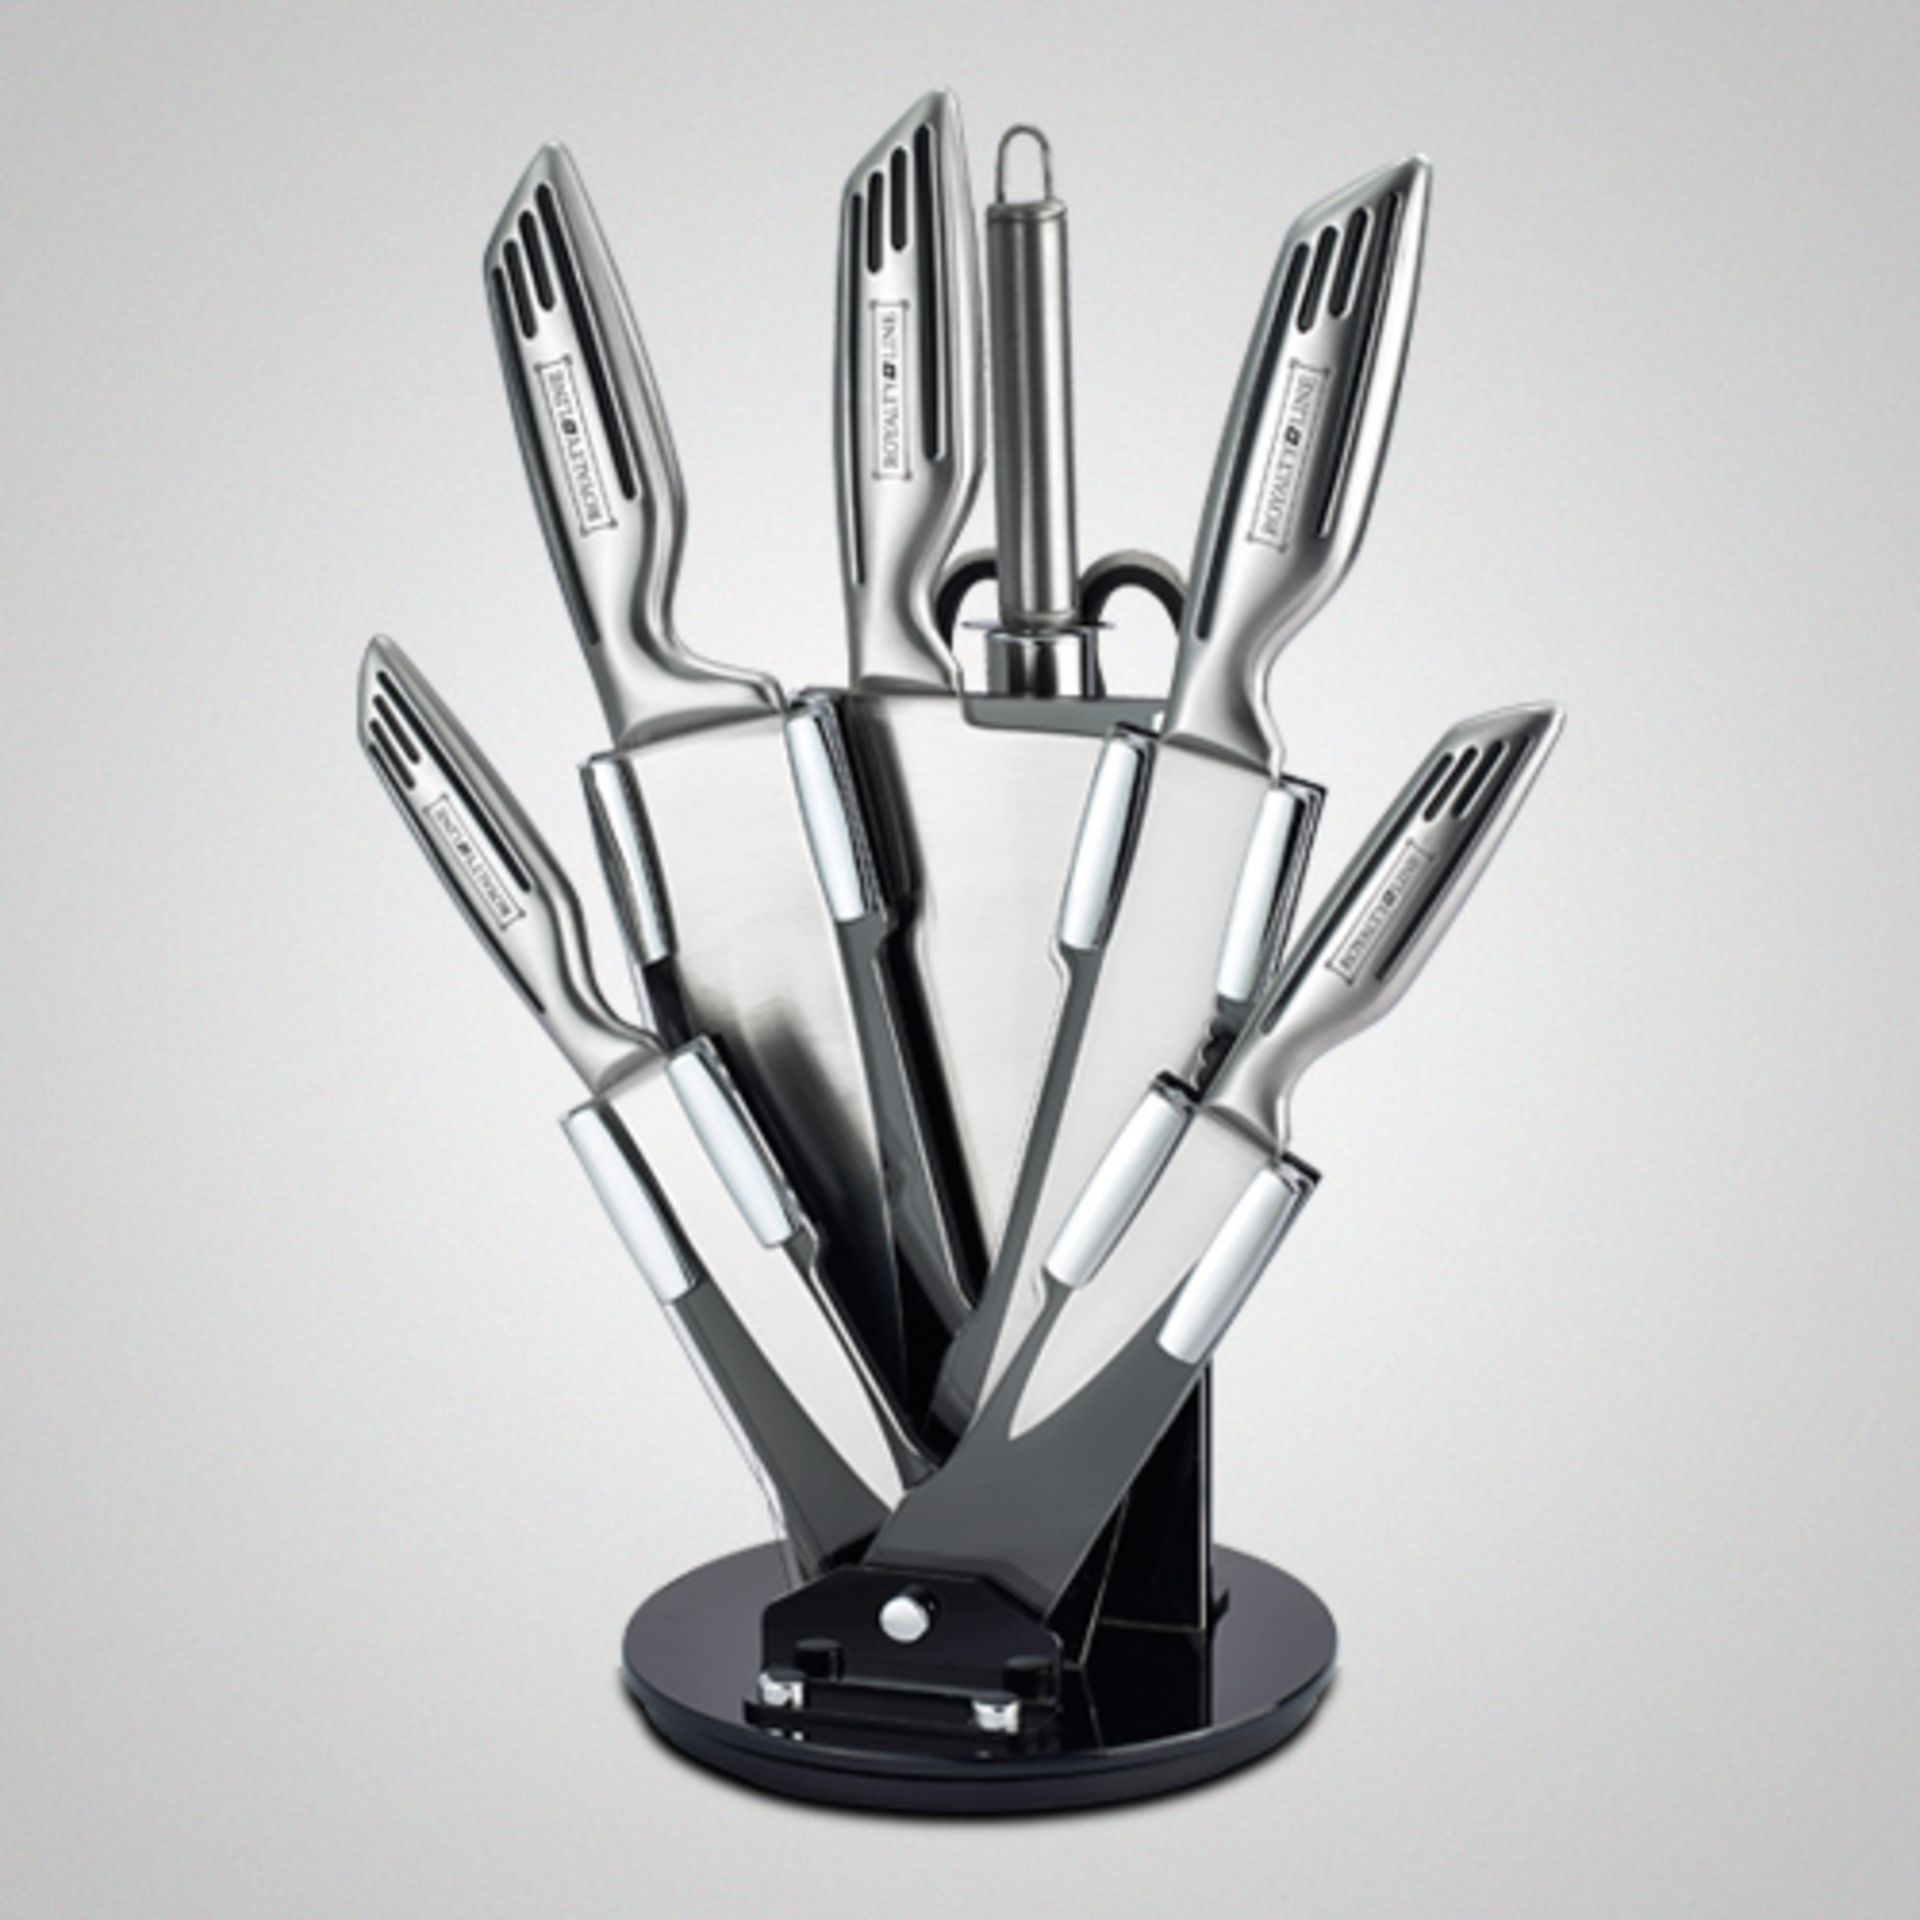 V Royalty Stainless Steel Eight Piece Kitchen Knife Set - Image 2 of 2